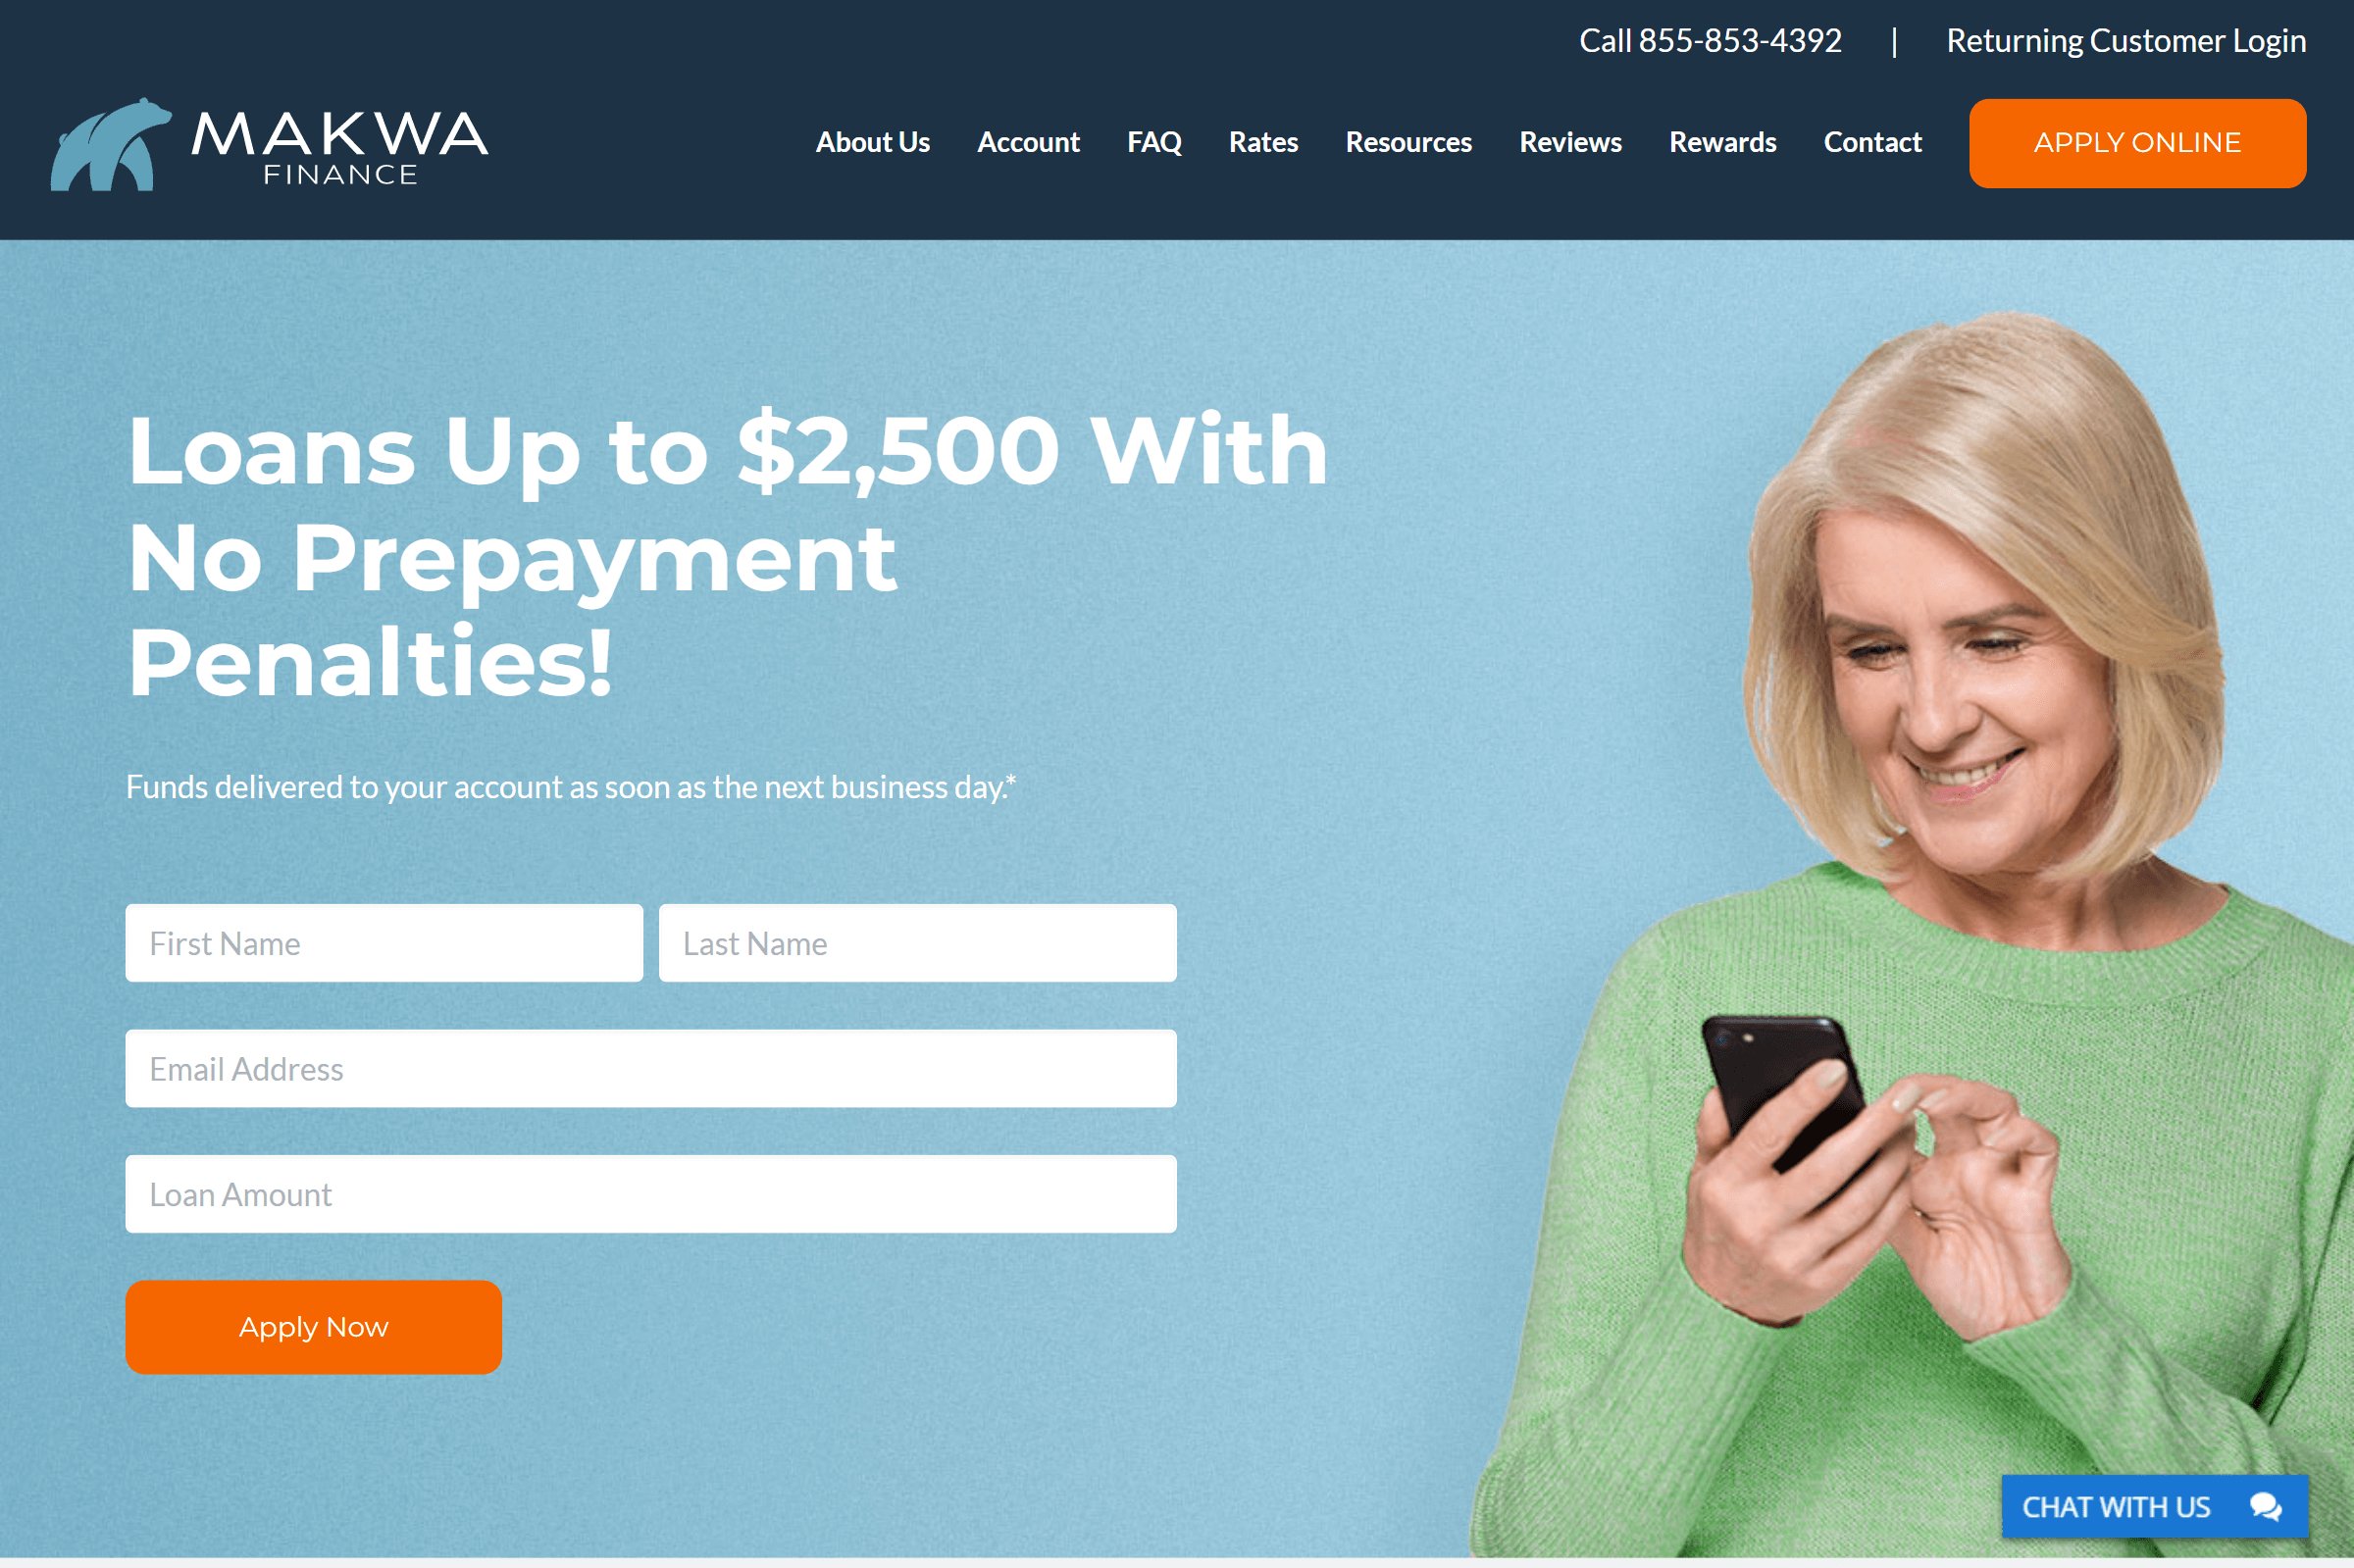 Makwa Finance on ReadSomeReviews